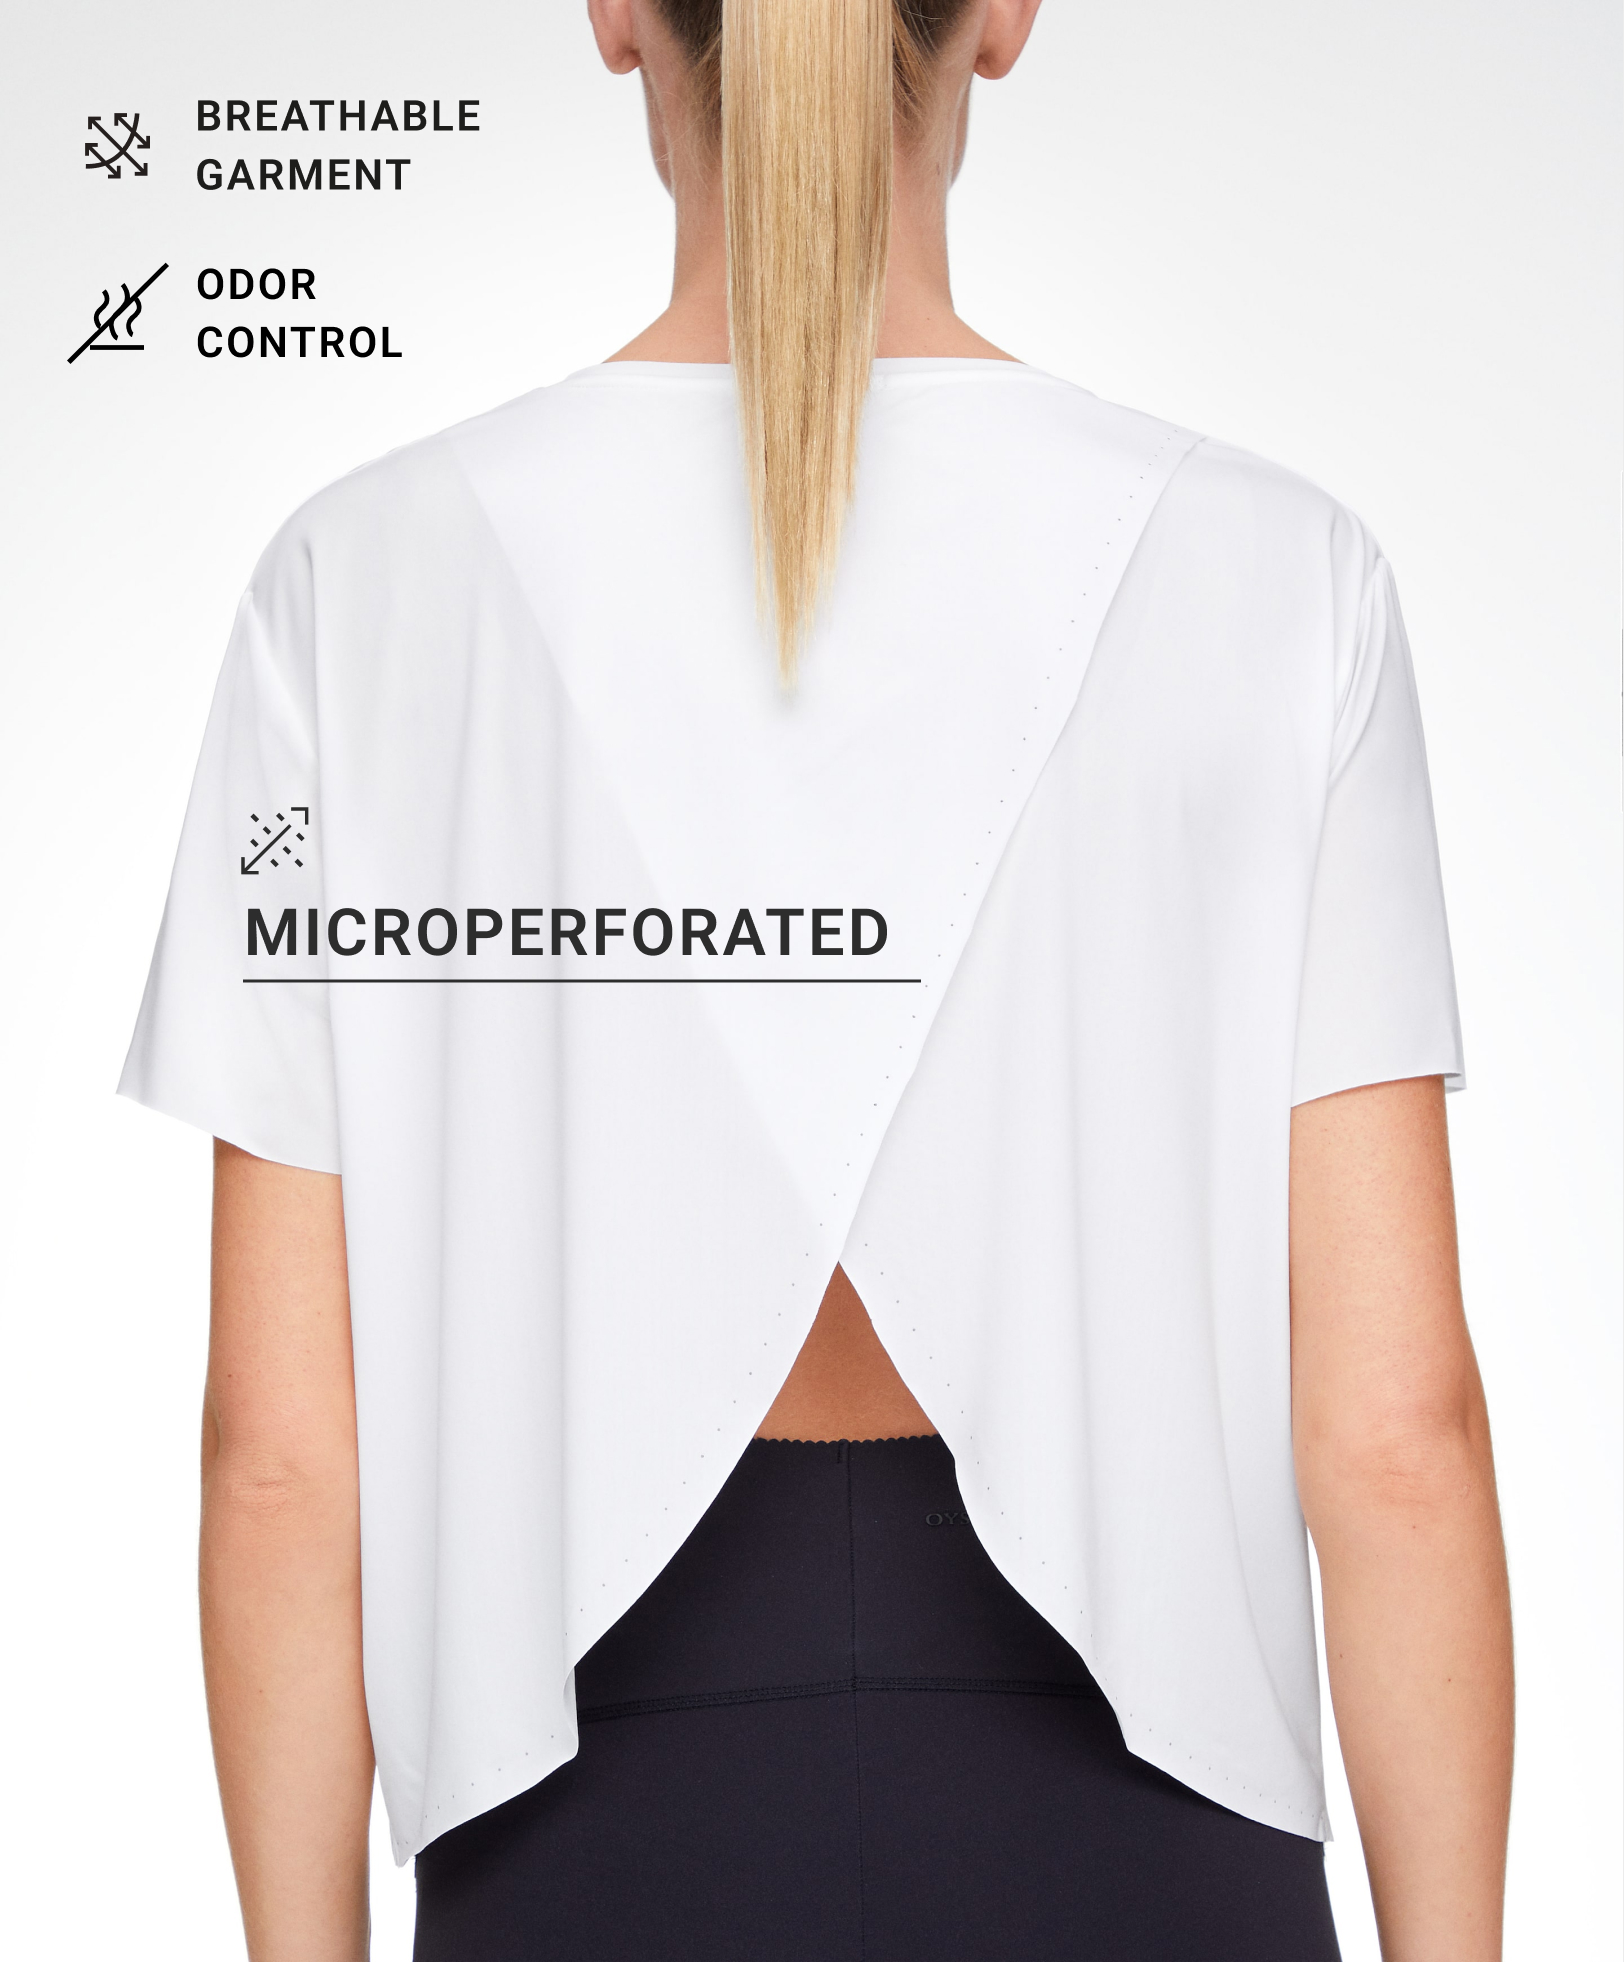 Microperforated short-sleeved technical T-shirt